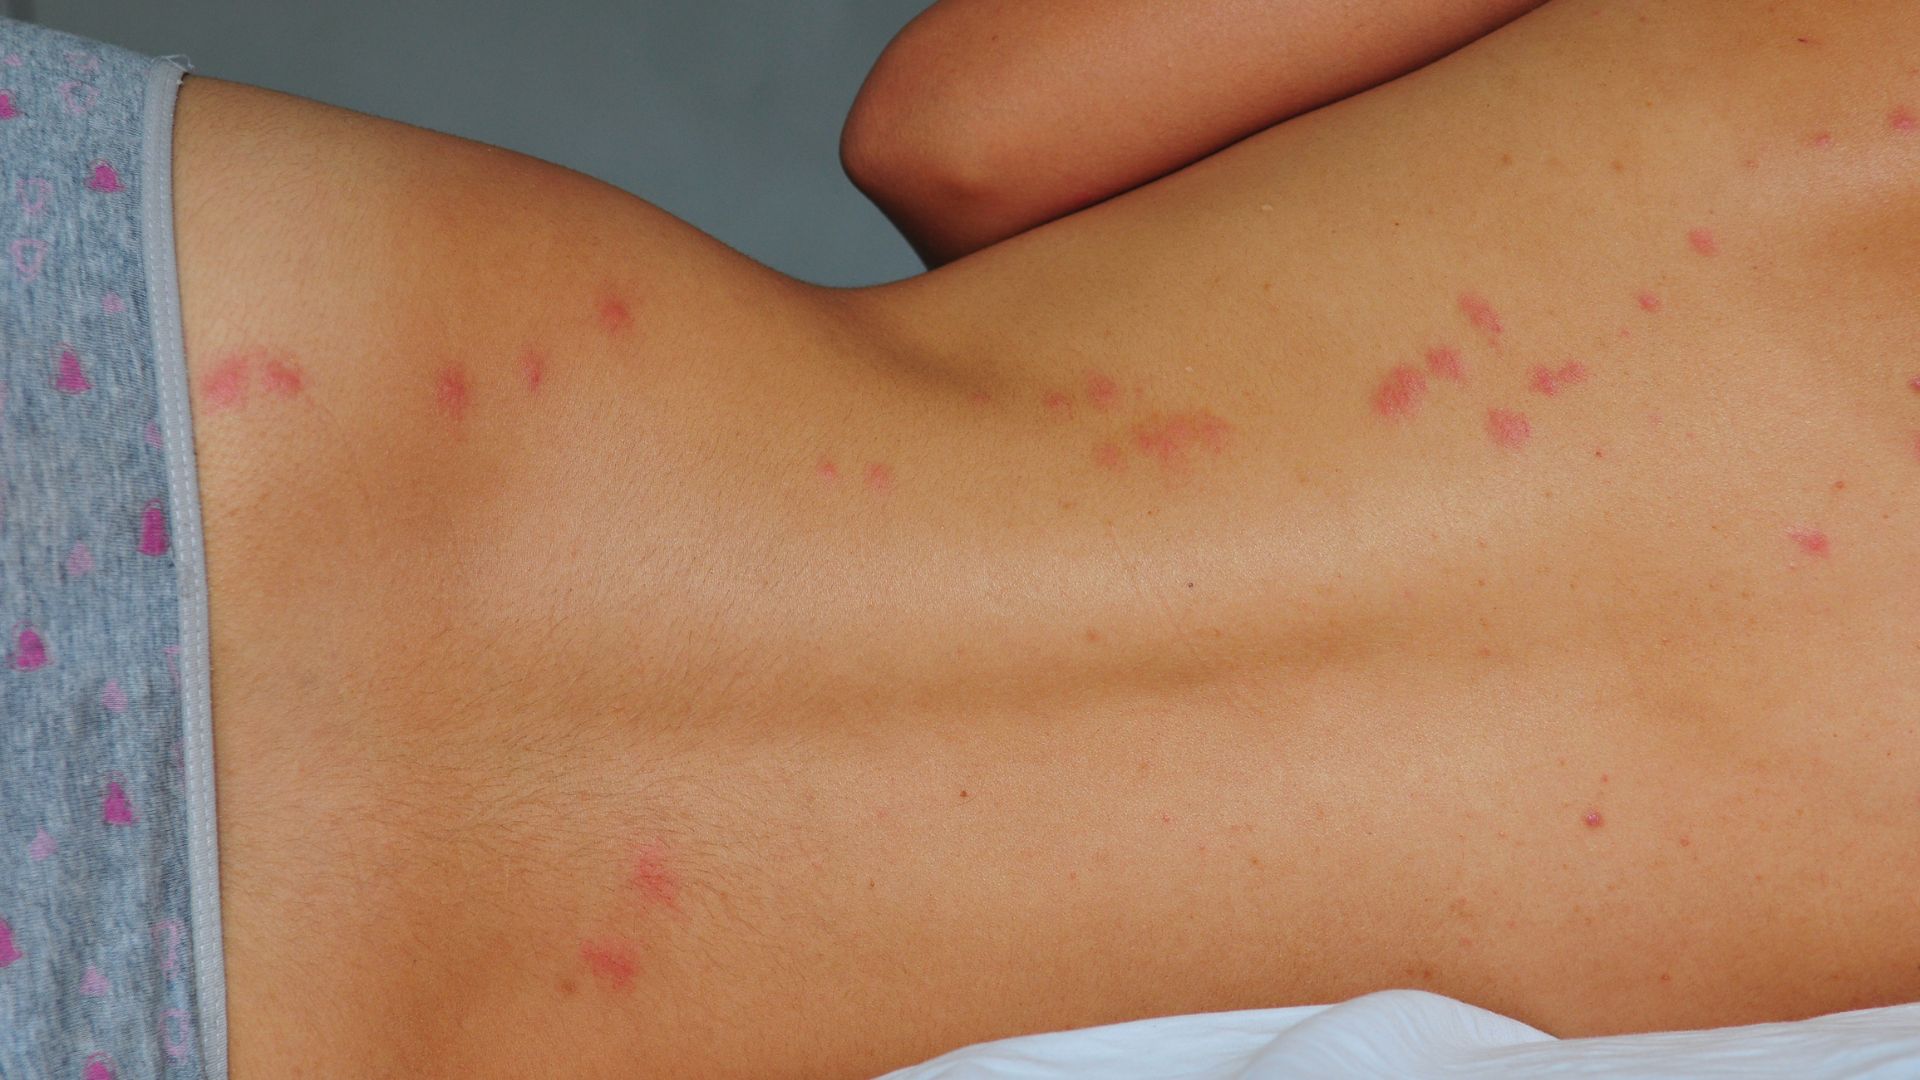 A woman lays on her side, exposing a track of bed bug bites accross her back